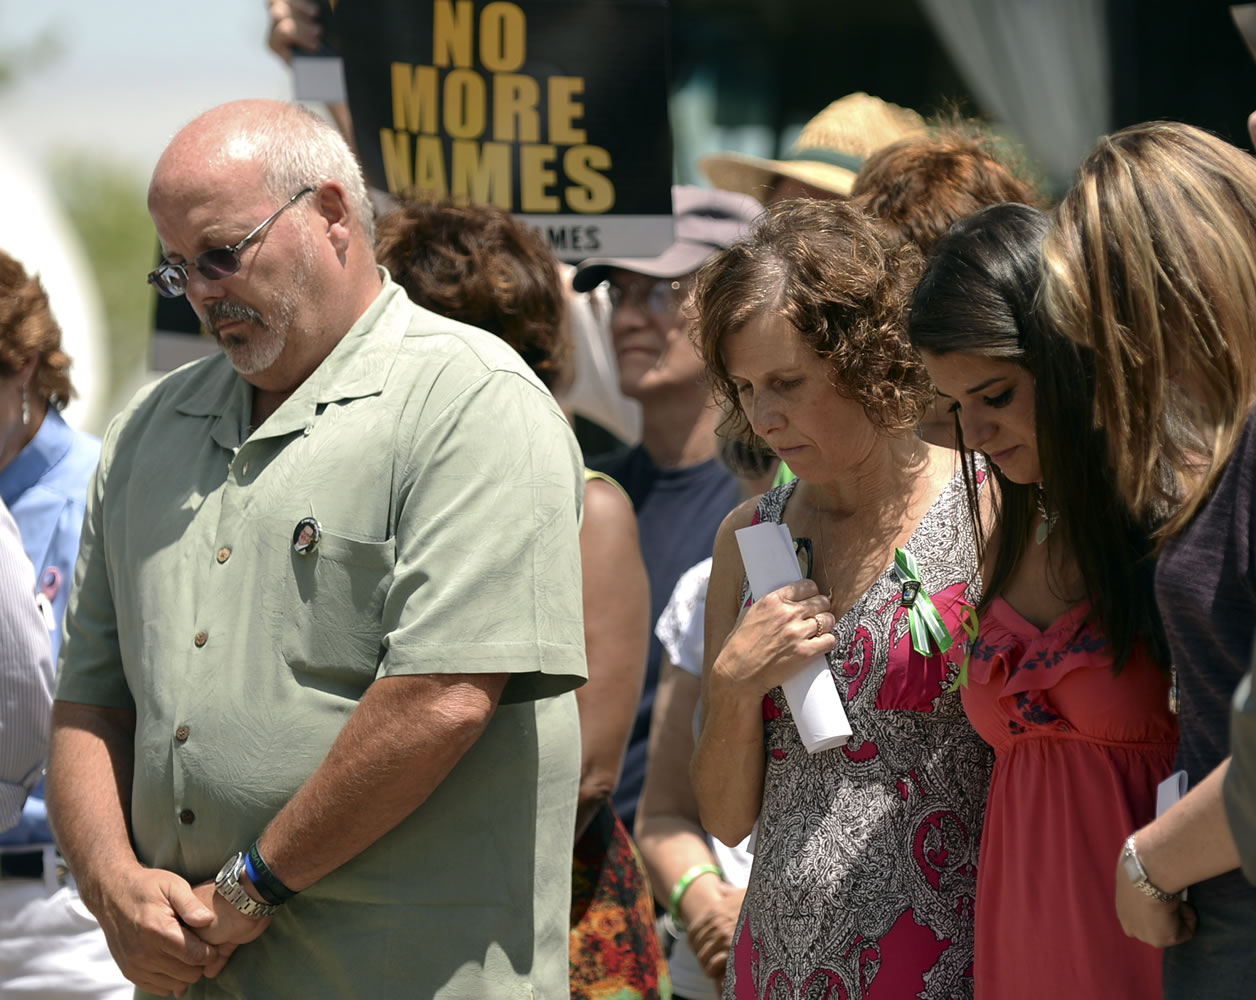 From left, Tom Sullivan, father of Aurora shooting victim Alex; Jane Dougherty, sister of Sandy Hook elementary school shooting victim Mary Sherlach; Carlee Soto, sister of Sandy Hook elementary school shooting victim Victoria; and Coni Sanders, daughter of Columbine High School shooting victim Dave Sanders, stand together during an event to honor those killed in the massacre at an Aurora, Colo. movie theater a year after the attack on Friday in Arapahoe County, Colo.